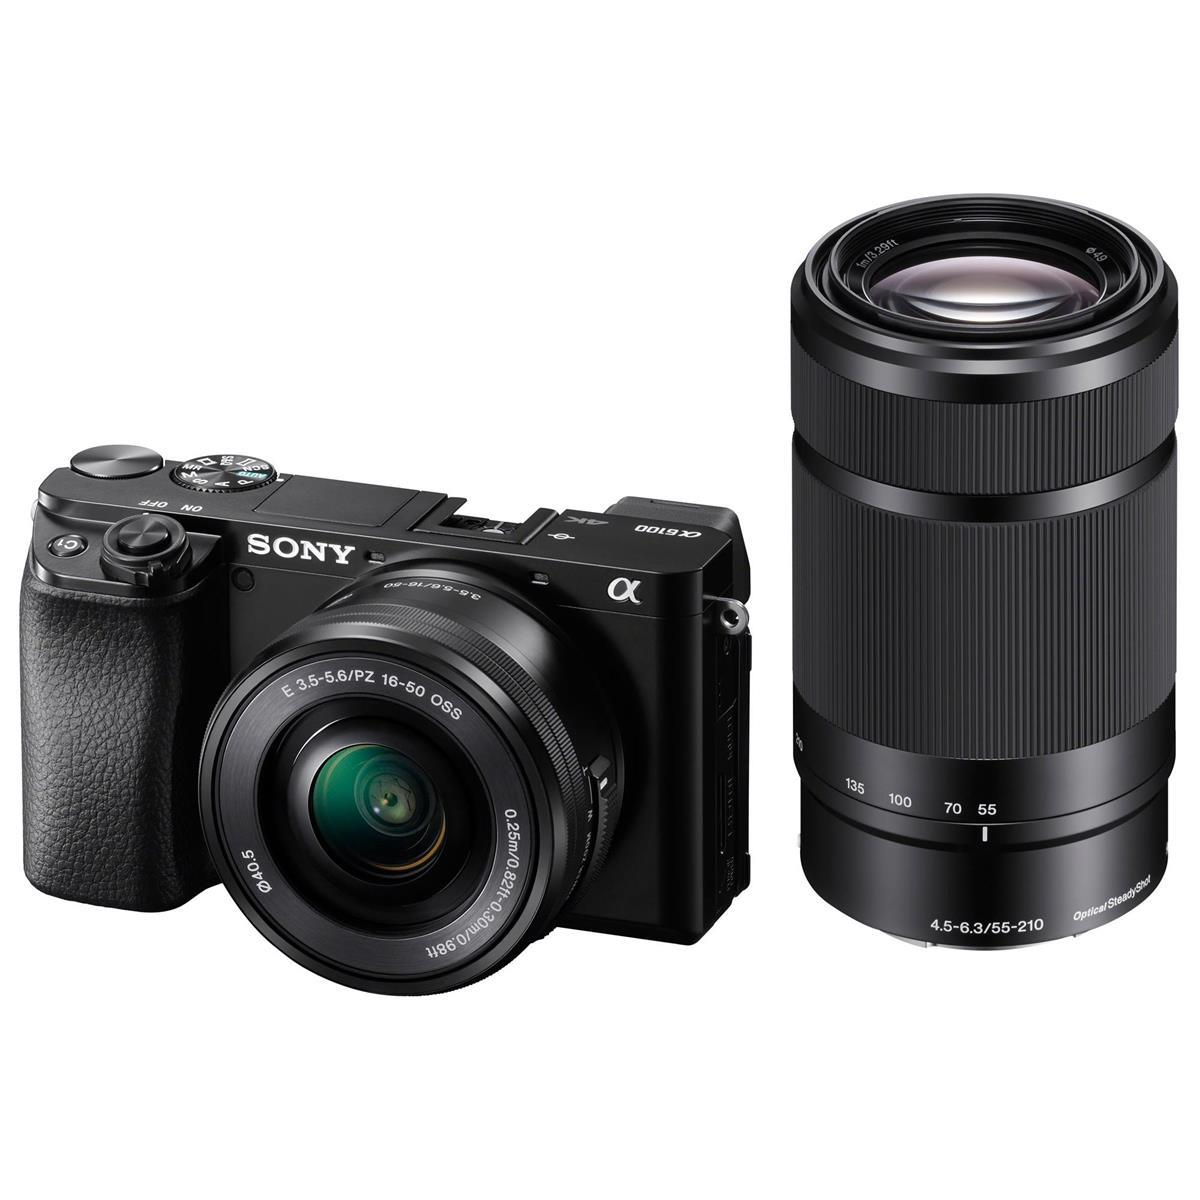 Sony Alpha a6100 Mirrorless Digital Camera with 16-50mm & 55-210mm Lenses